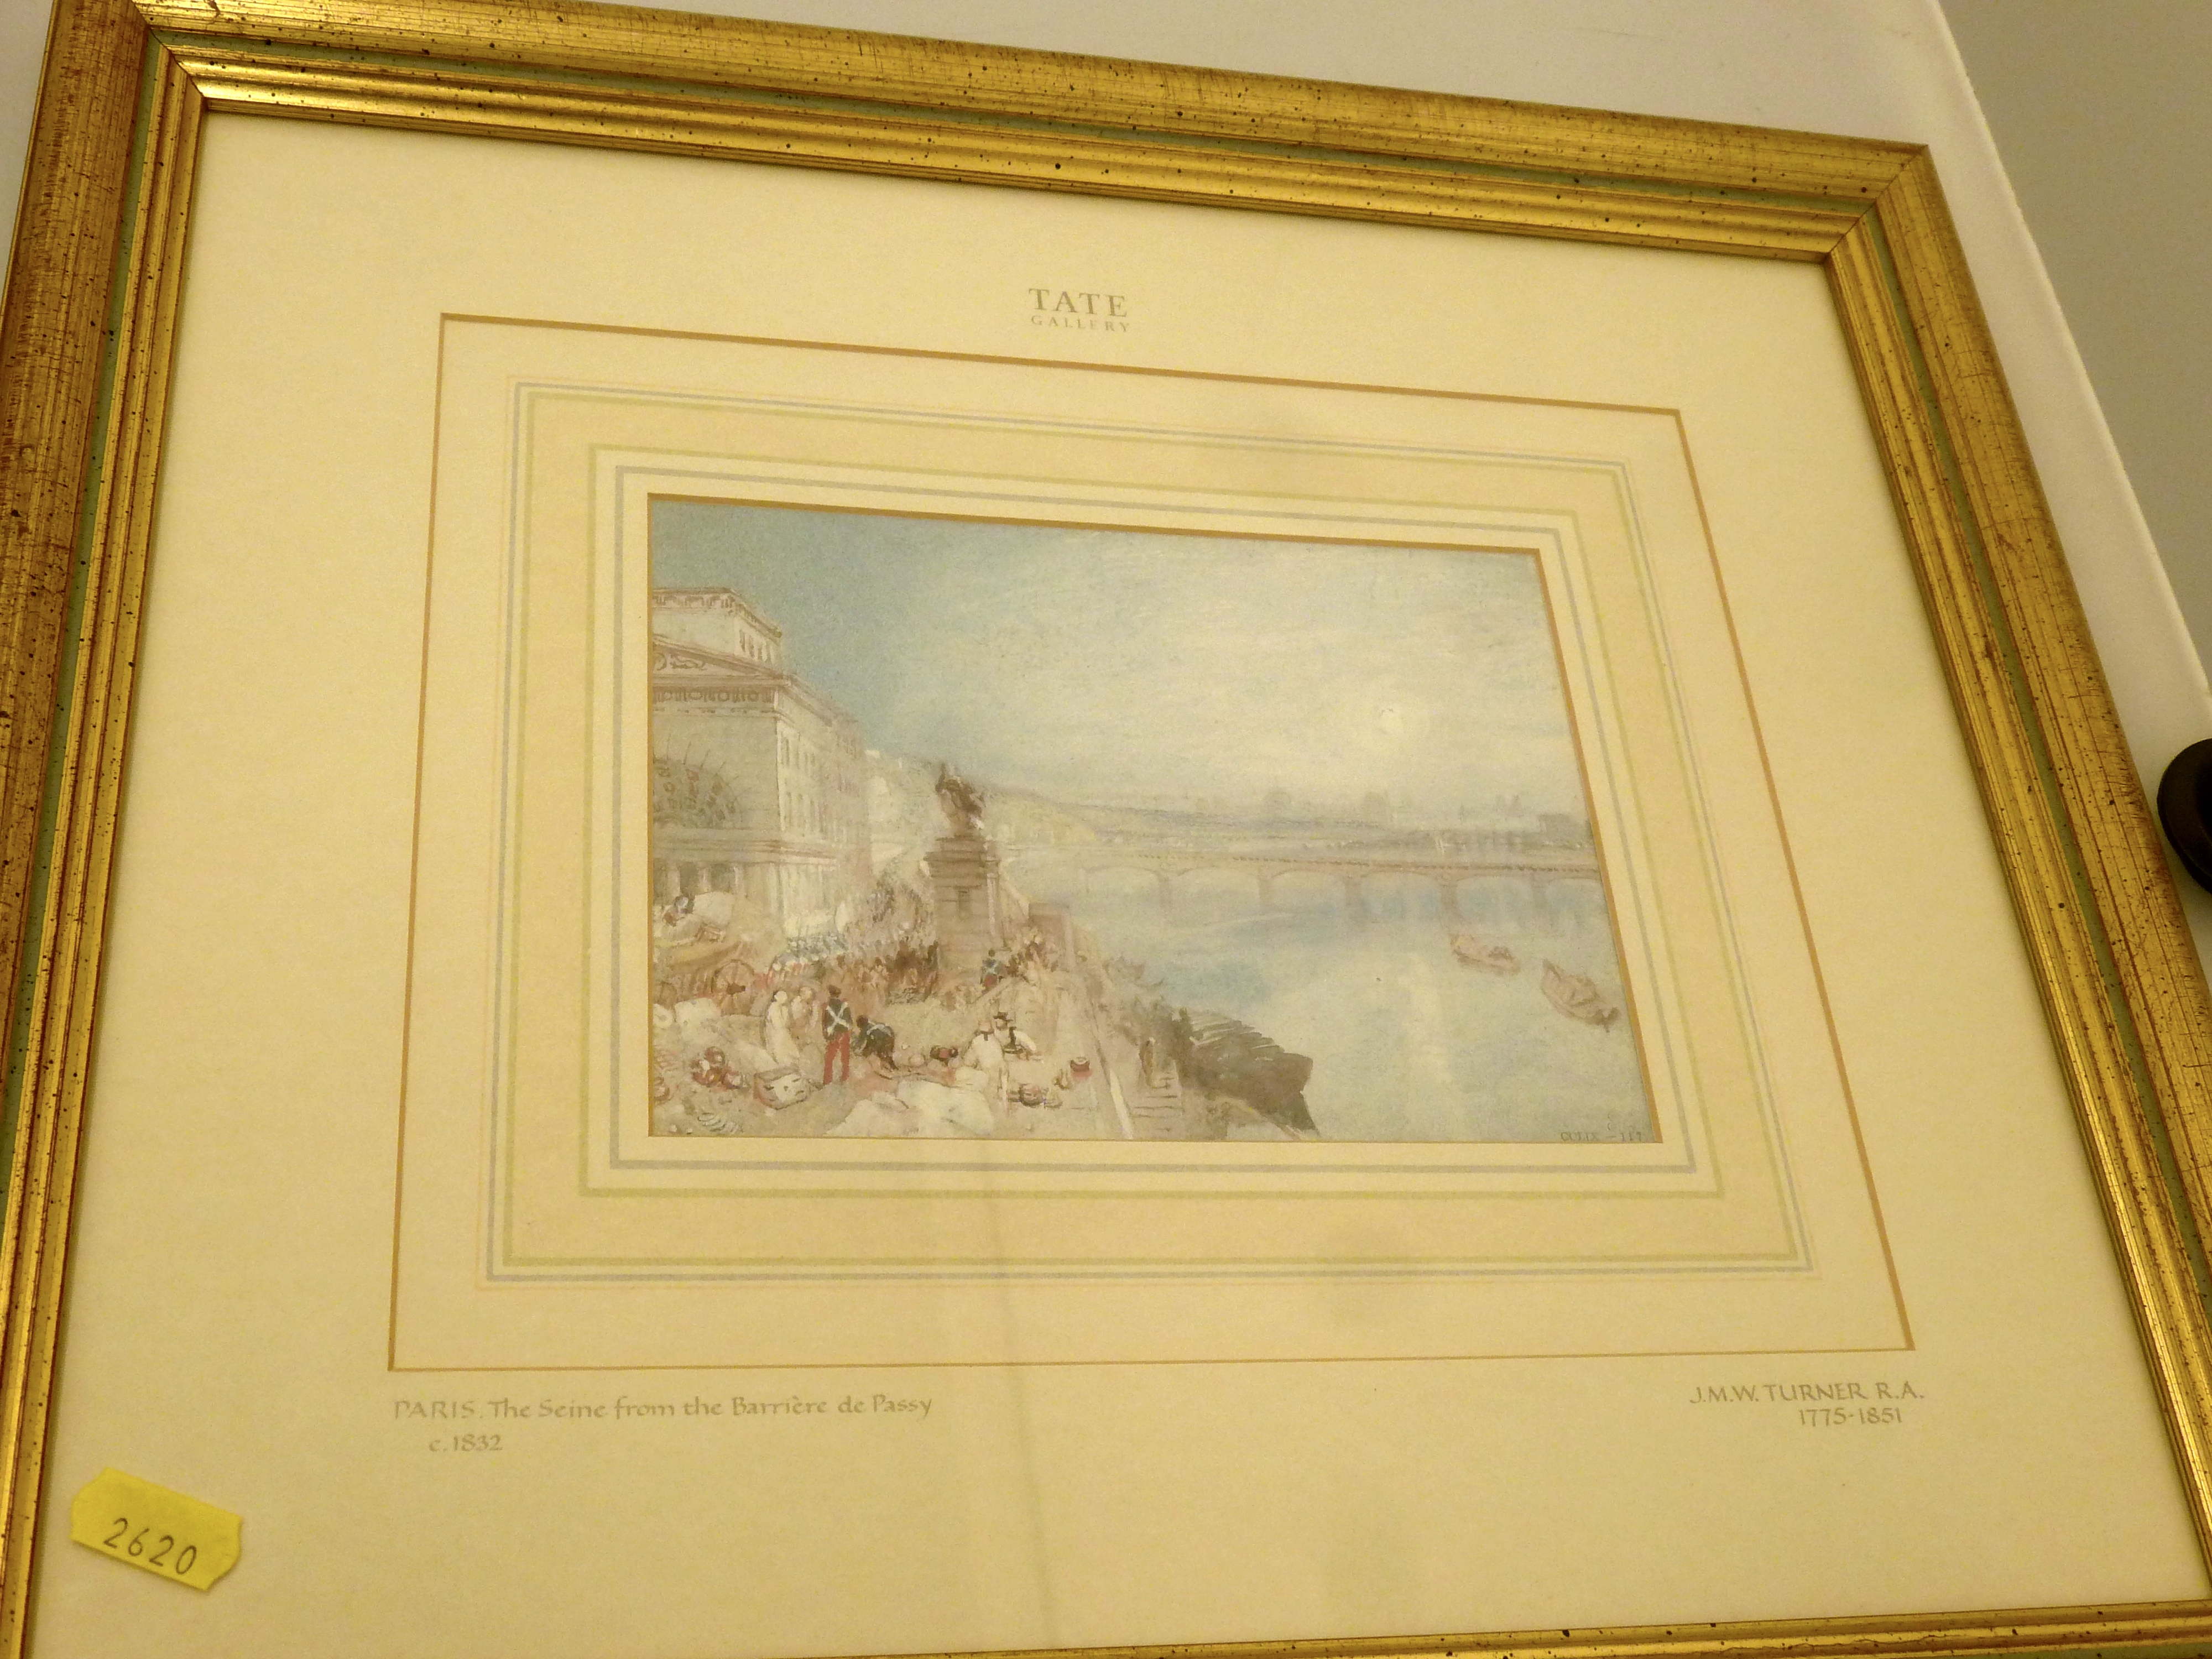 4 TATE GALLERY LIMITED EDITION J.M.W. TURNER 'WANDERINGS BY THE SEINE' PRINTS 908/5000 APPROX 5. - Image 6 of 9